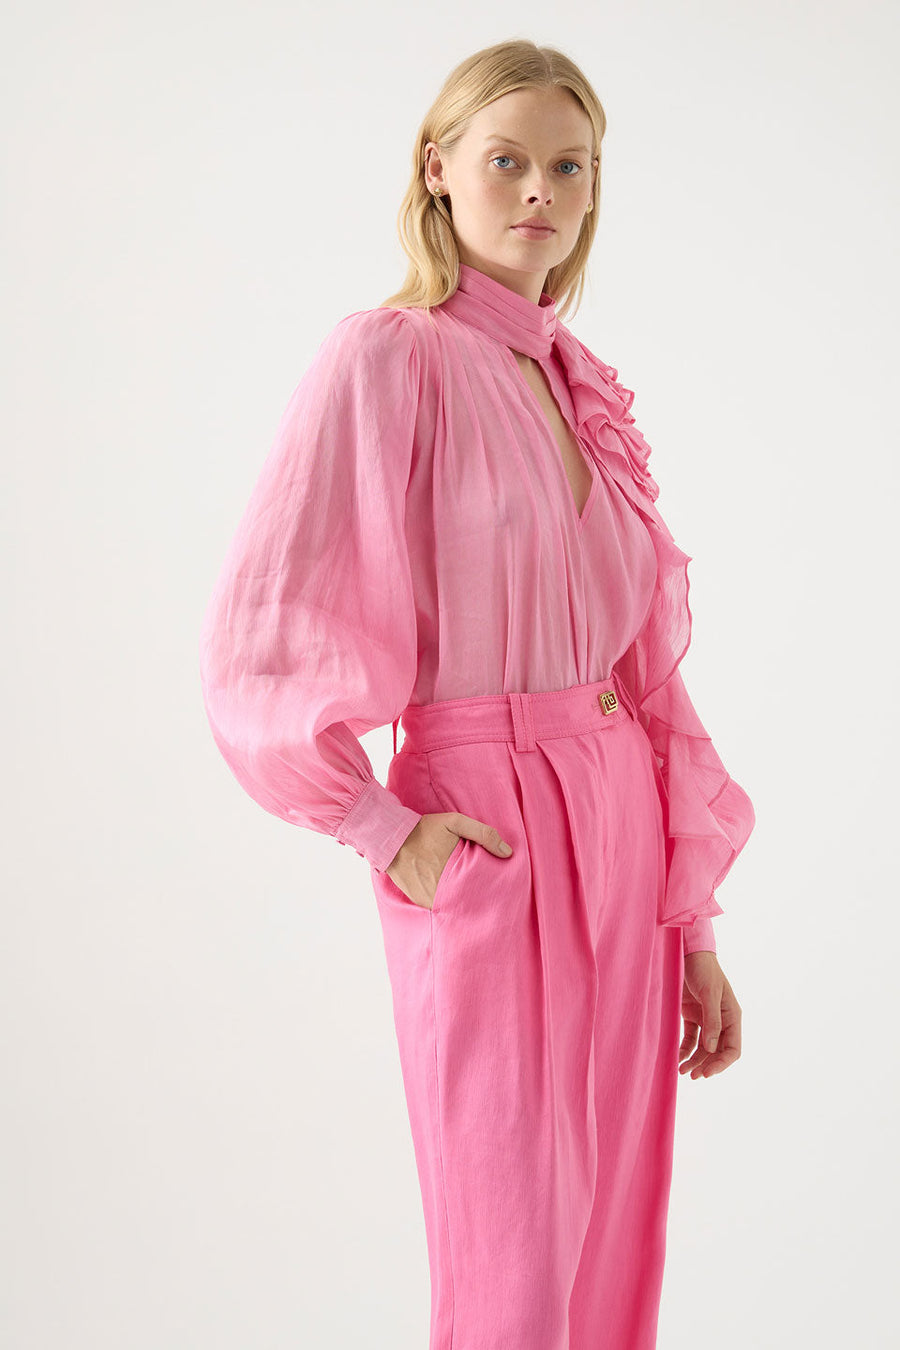 aje Aura Frilled Tie Blouse pink